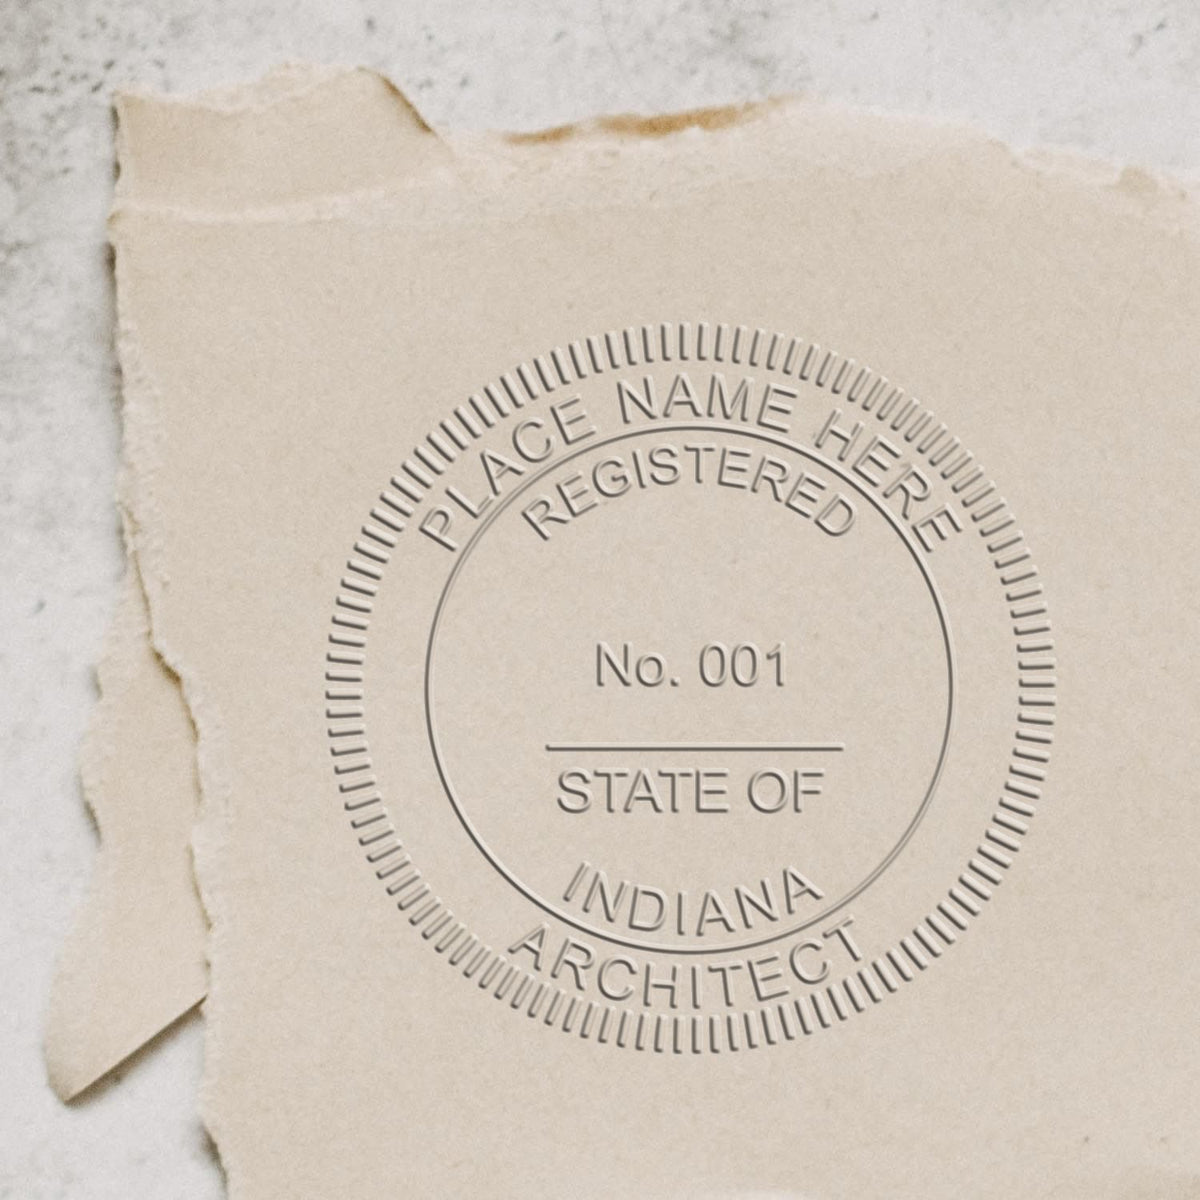 The State of Indiana Long Reach Architectural Embossing Seal stamp impression comes to life with a crisp, detailed photo on paper - showcasing true professional quality.